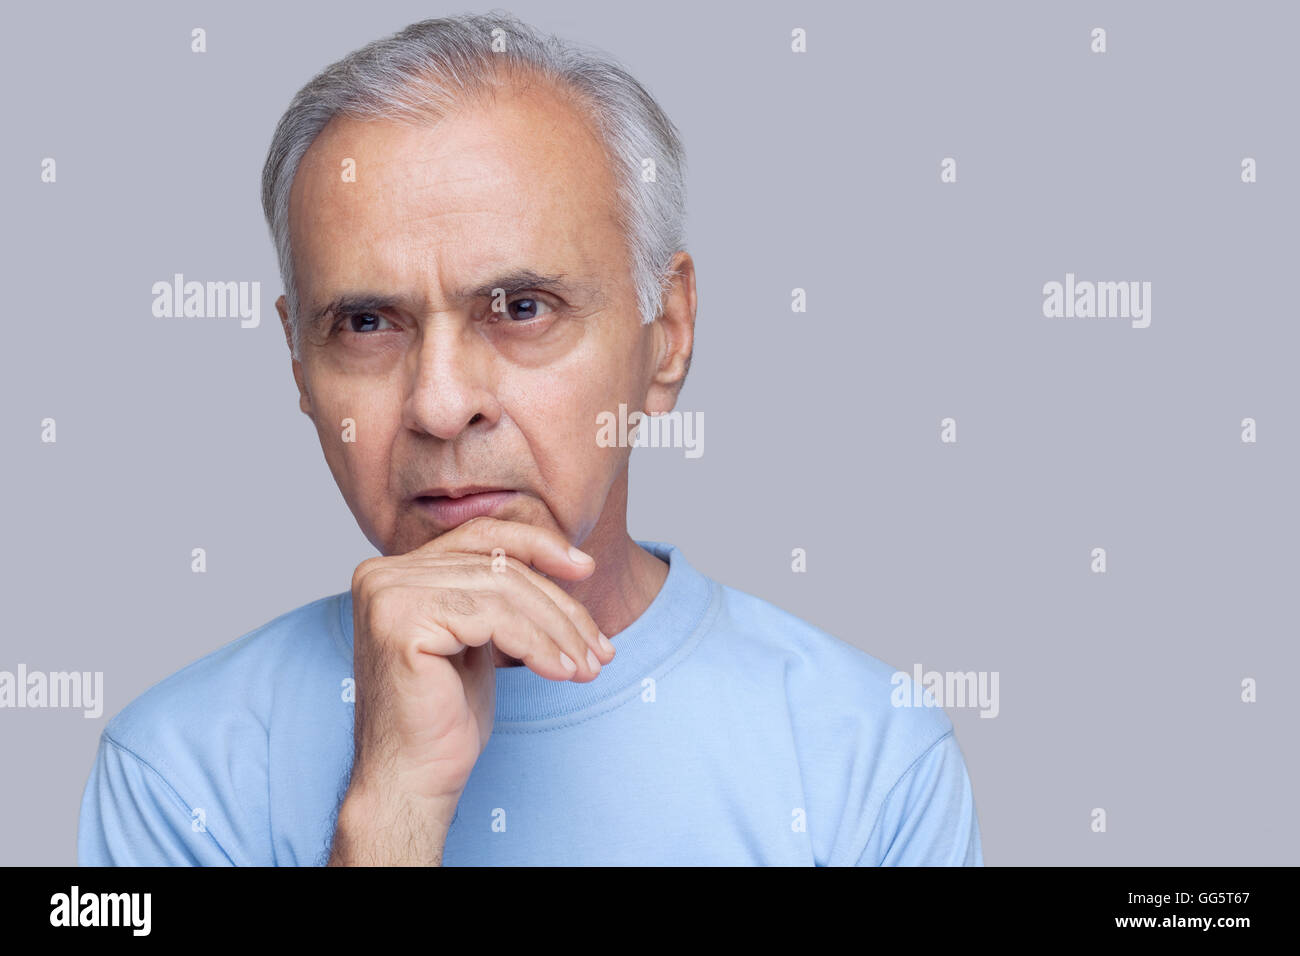 Close-up of thoughtful man over gray background Stock Photo